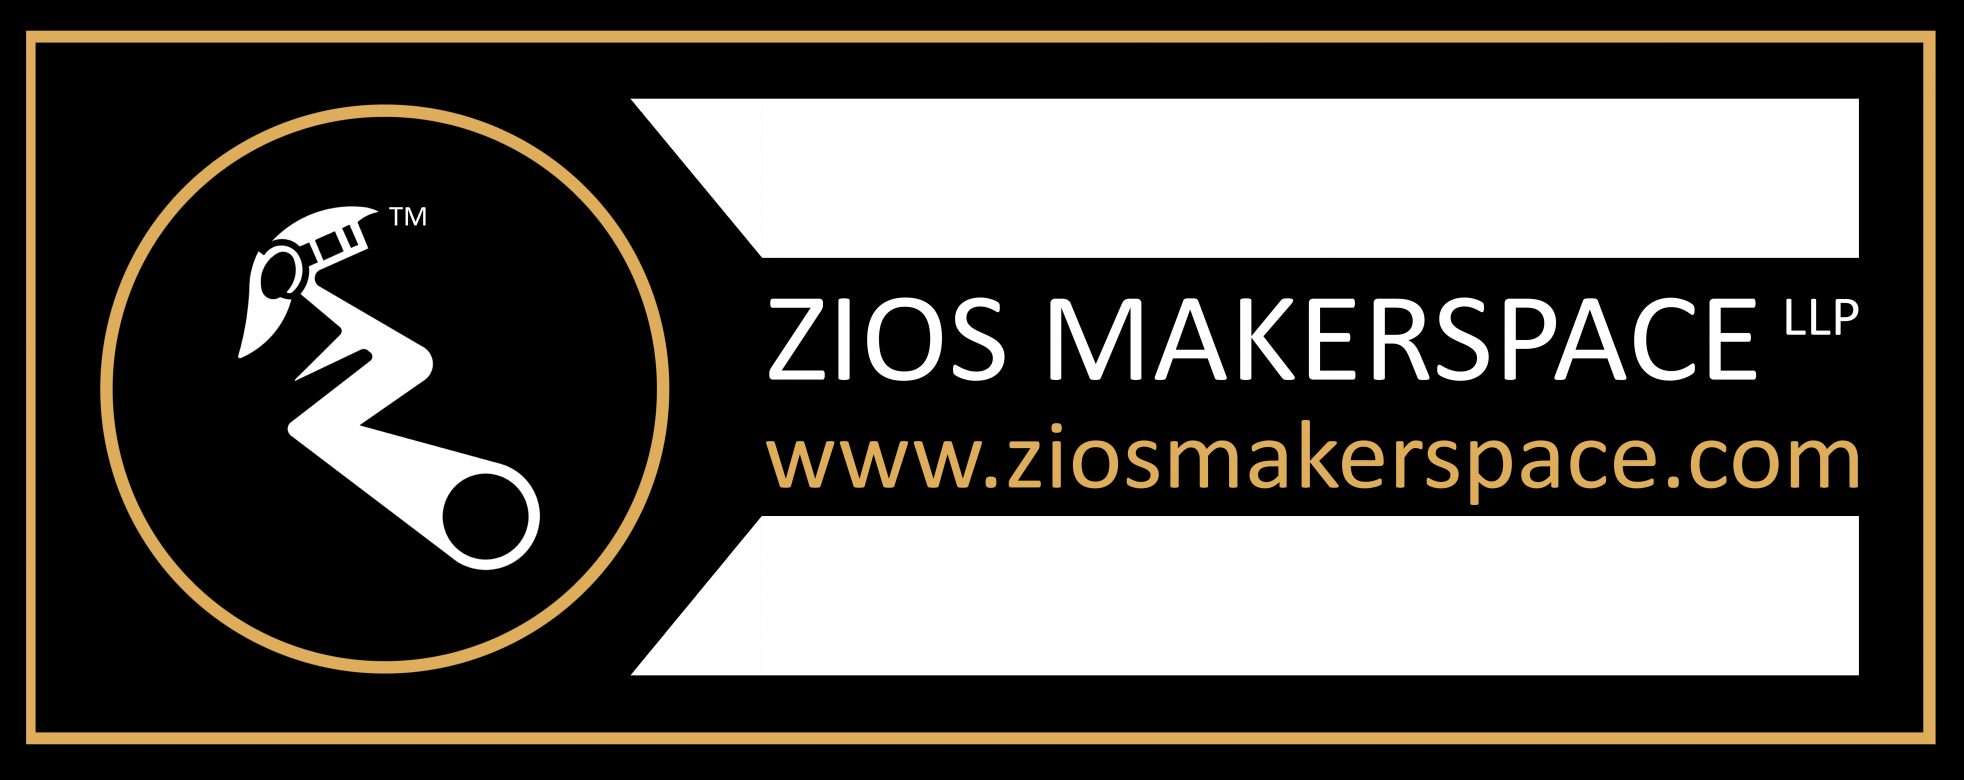 Zios Makerspace LLP Complete Logo